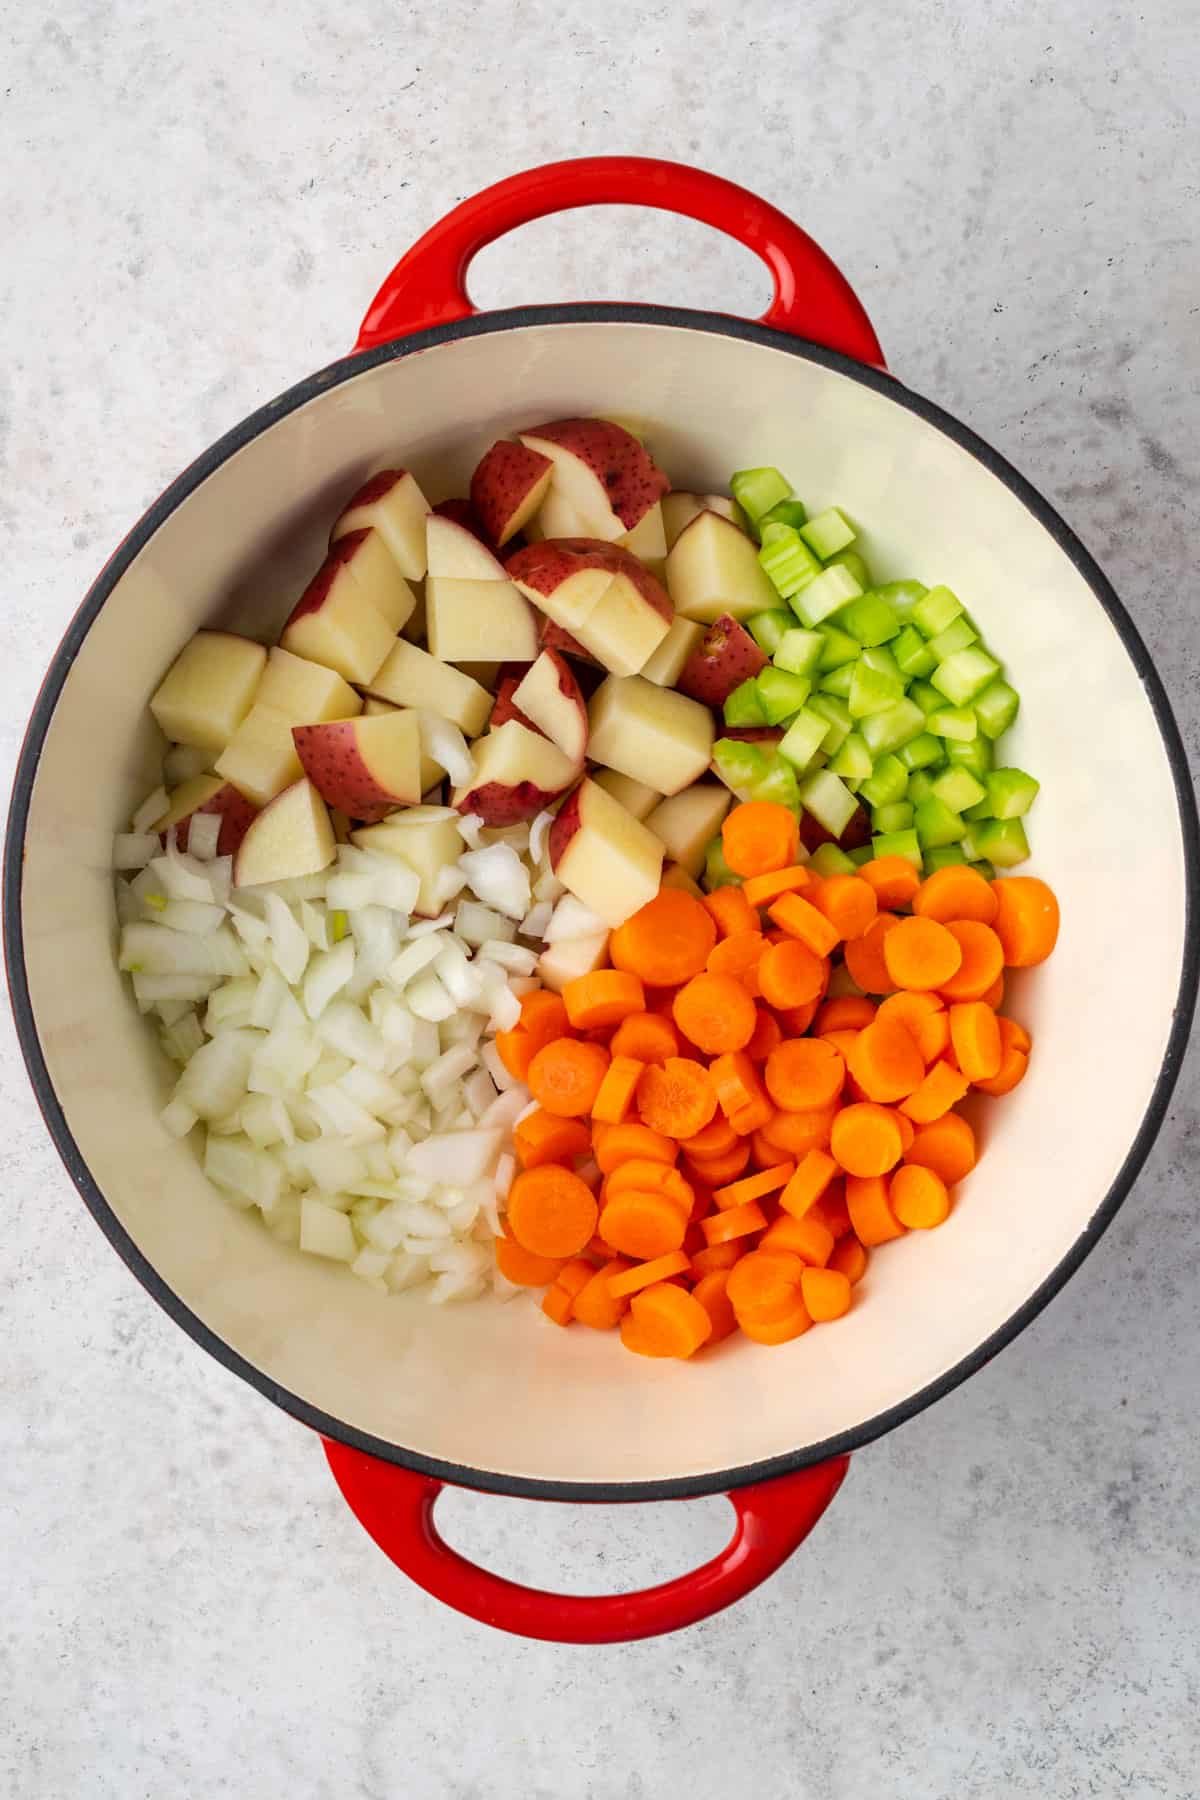 A large pot with potatoes, celery, onions and carrots.